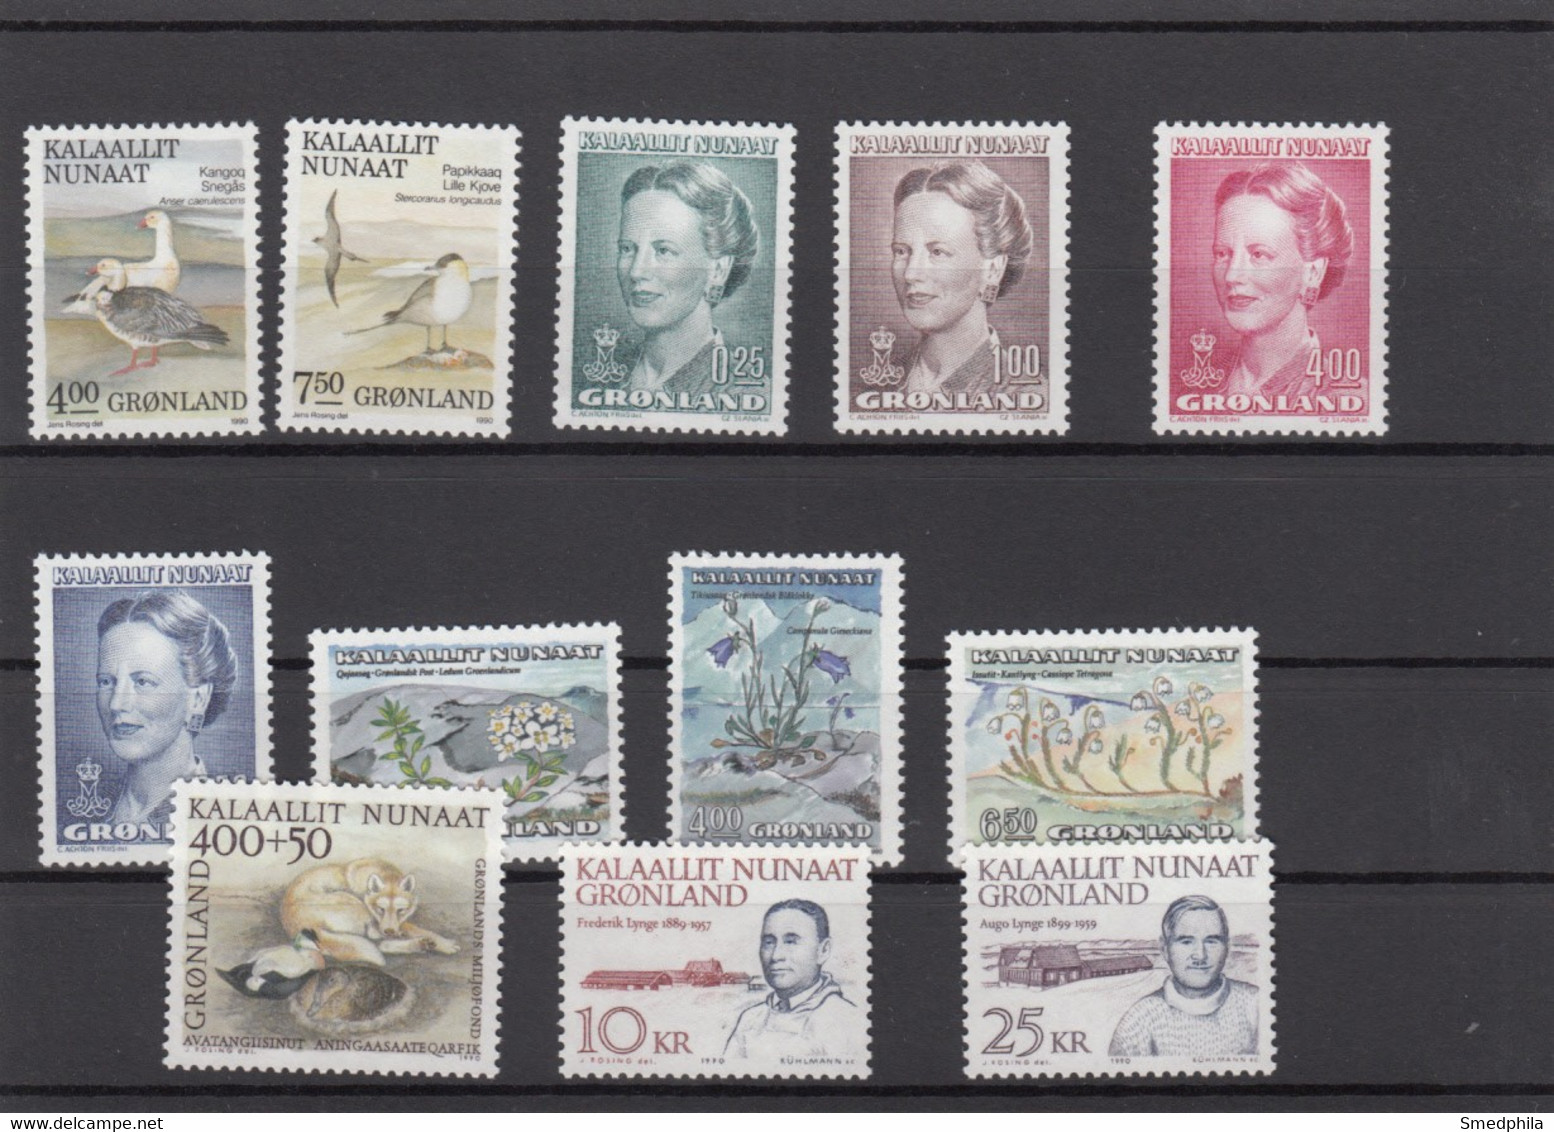 Greenland 1990 - Full Year MNH ** - Années Complètes